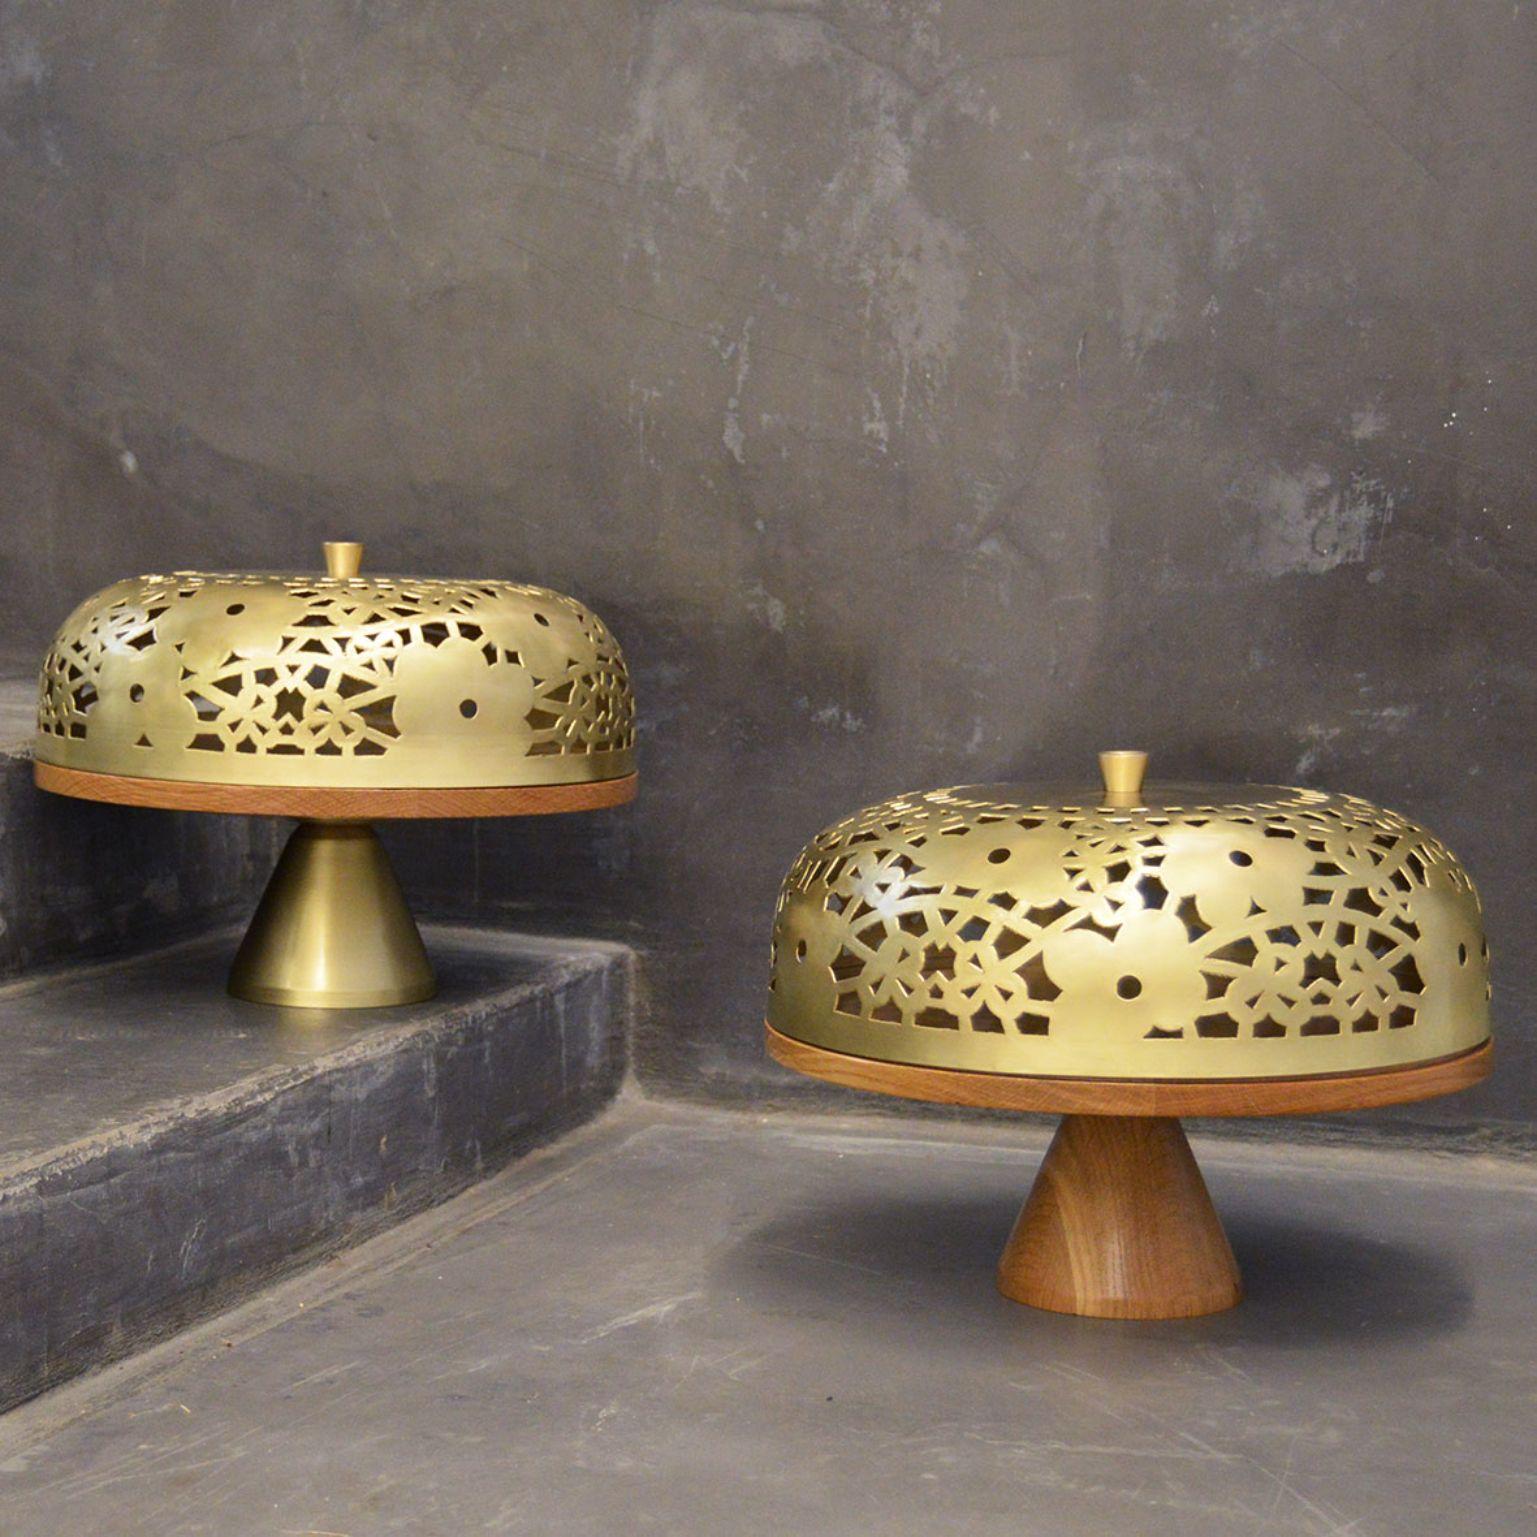 Set of 2 camille cake stands by Marc Dibeh
2014
Materials: French oak, brass
Dimensions: D 40 x H 35 cm 

Beirut based designer Marc Dibeh narrates his cultural environment through compelling interiors and products.
His studio’s philosophy